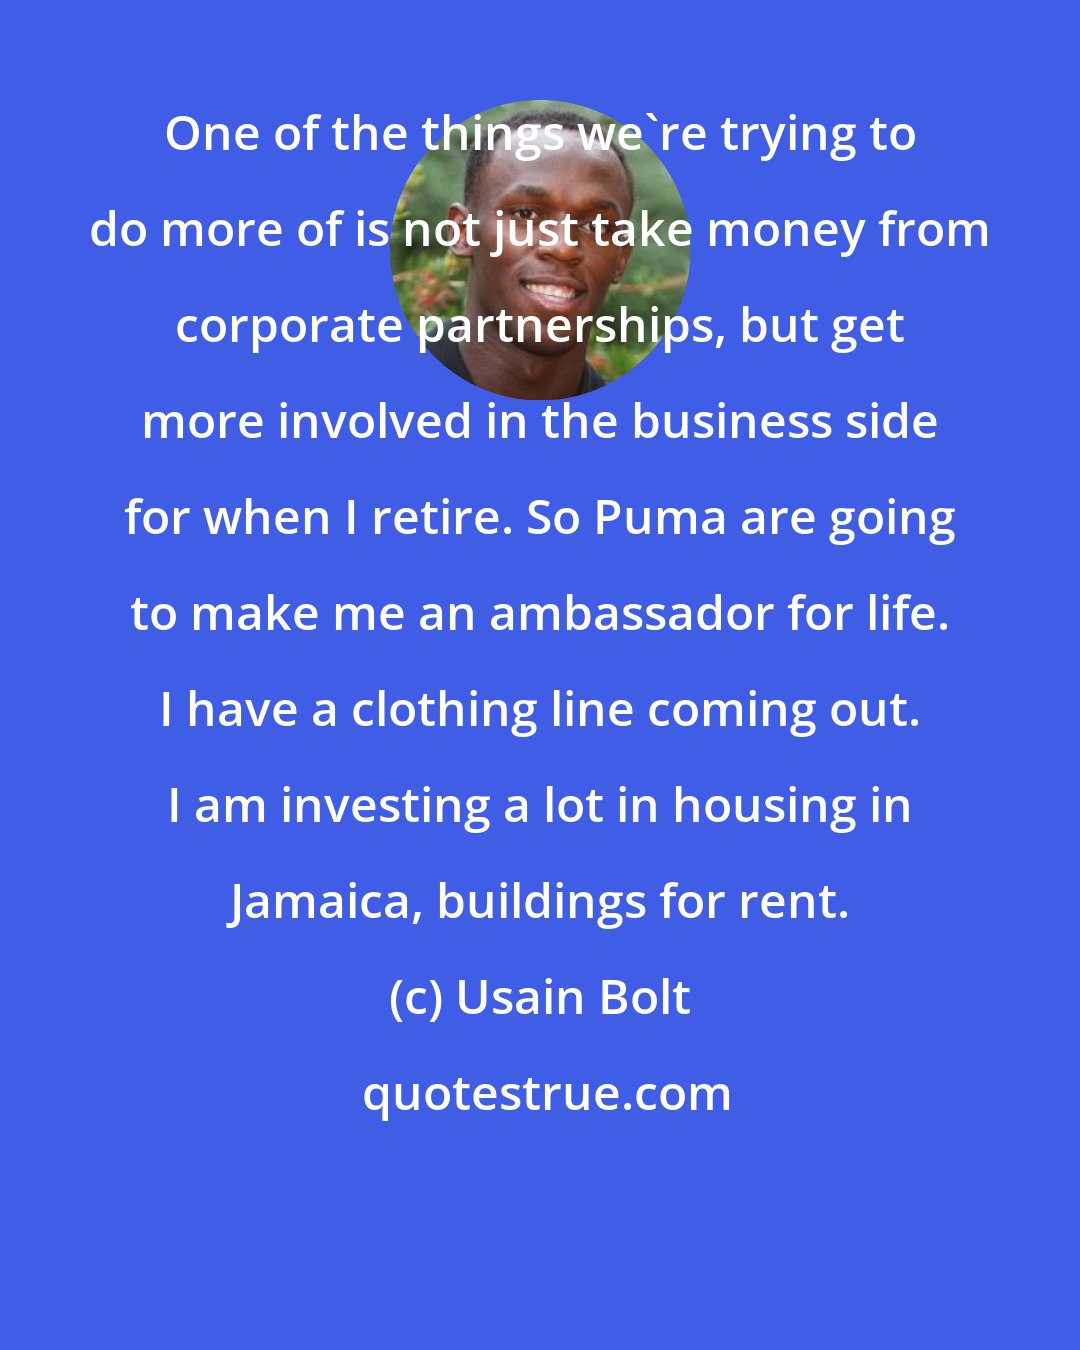 Usain Bolt: One of the things we're trying to do more of is not just take money from corporate partnerships, but get more involved in the business side for when I retire. So Puma are going to make me an ambassador for life. I have a clothing line coming out. I am investing a lot in housing in Jamaica, buildings for rent.